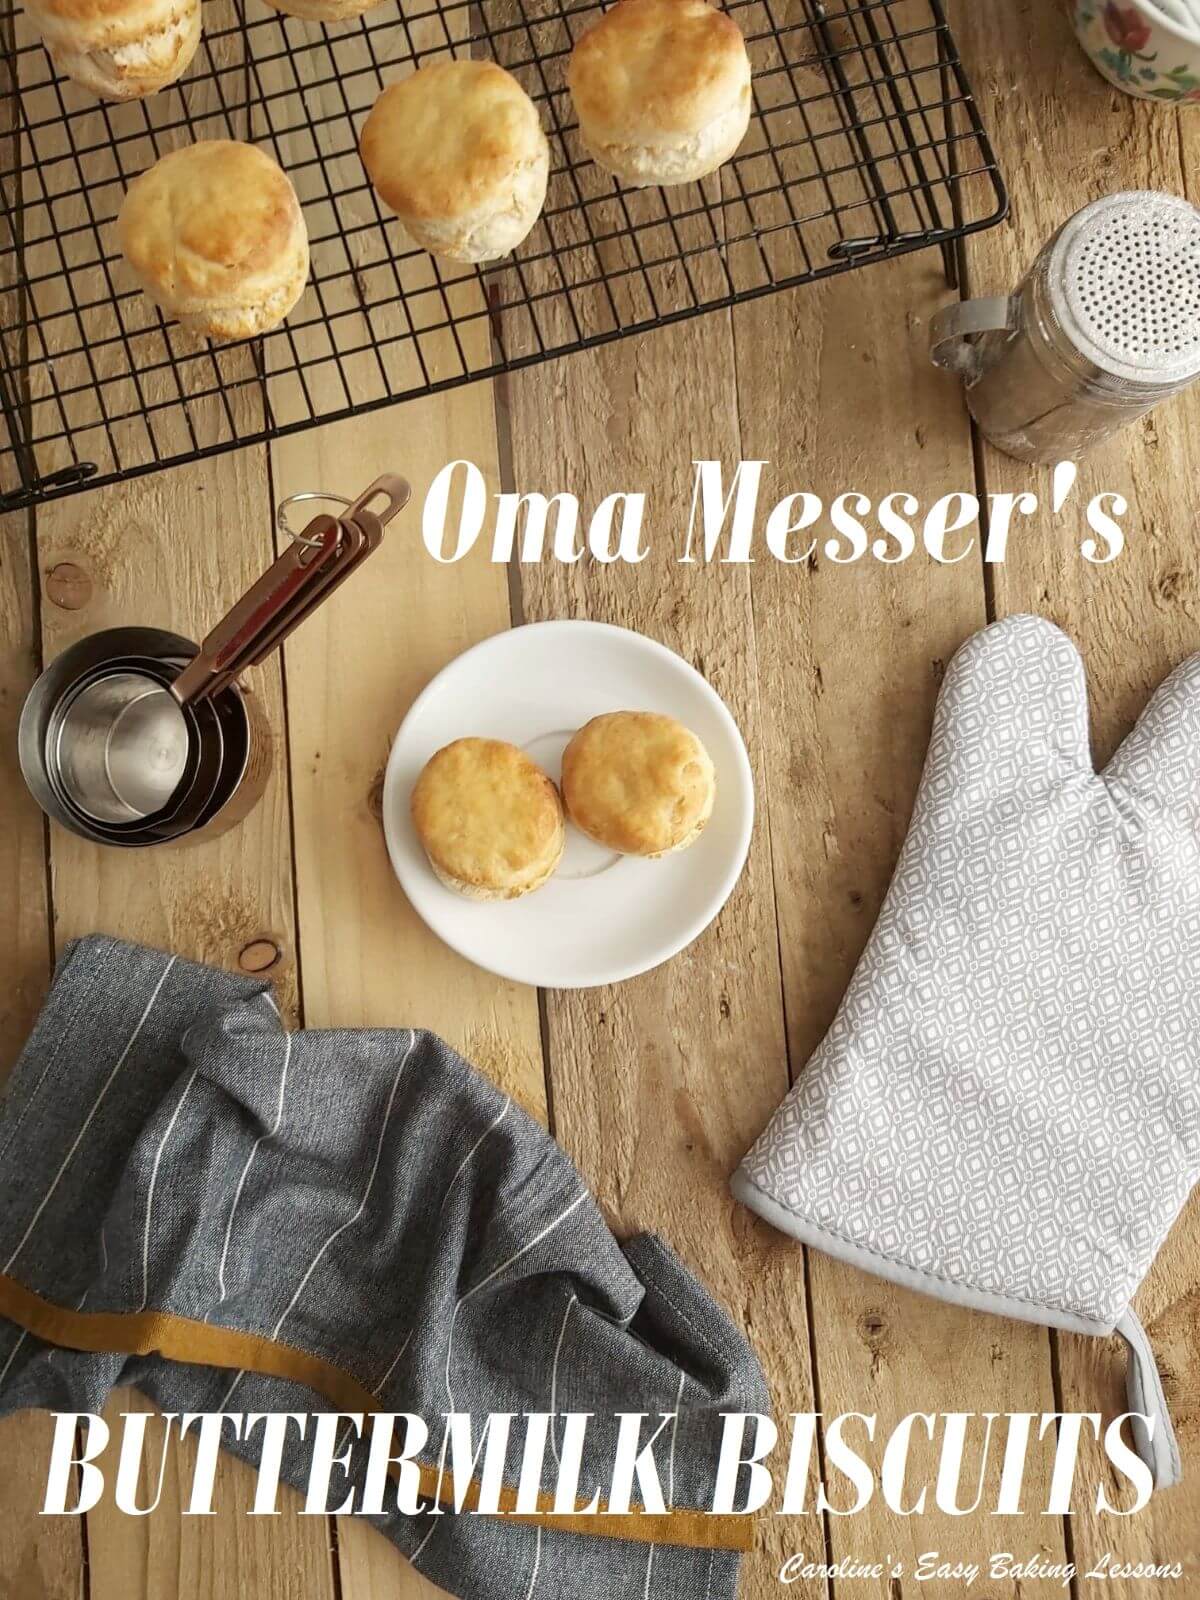 Oma Messer’s Buttermilk Biscuits – Passing Down Recipes Through The Generations